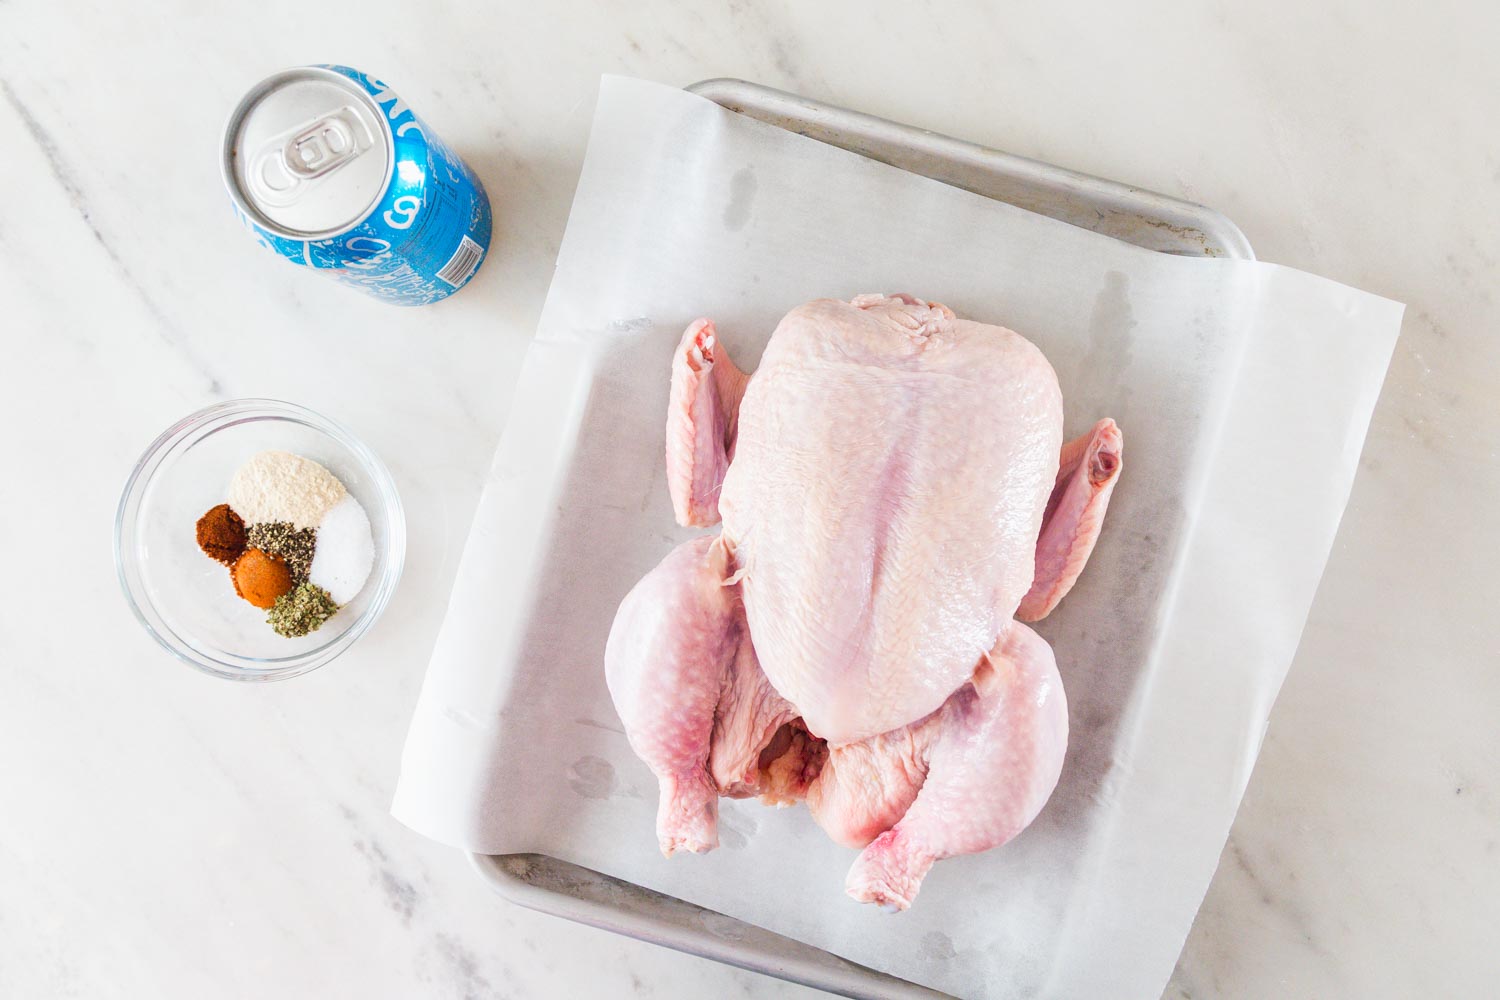 Ingredients needed to make beer can chicken including a raw whole chicken, a beer, and spice rub